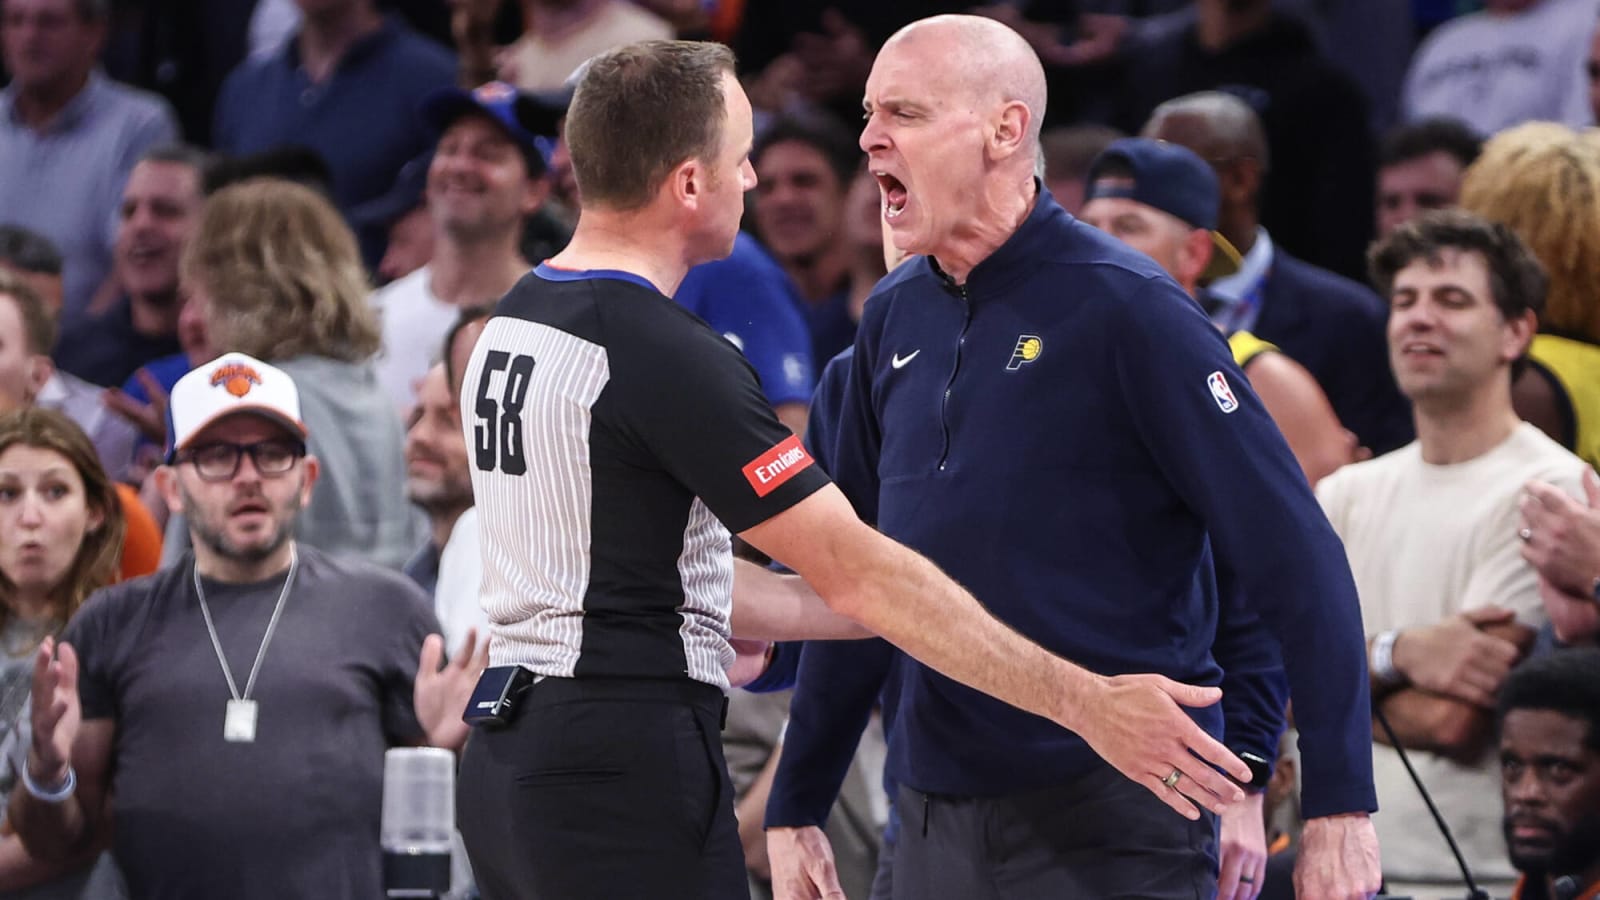 Pacers HC Rick Carlisle calls foul on officials in series vs. Knicks: 'We deserve a fair shot'